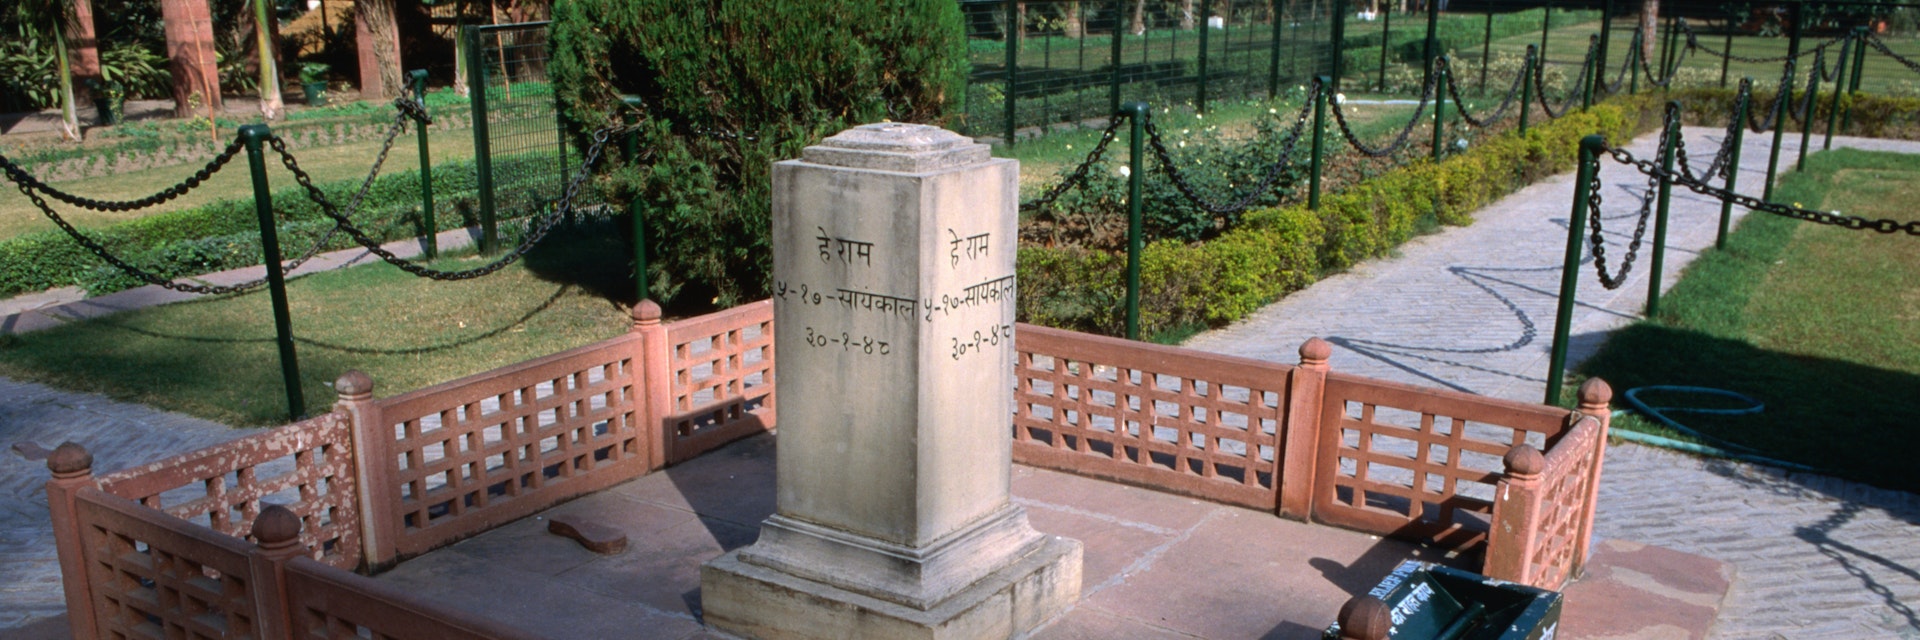 Monument marking place of the assassination of Mahatma Gandhi in Gandhi Smriti, formerly known as Birla House, Gandhi Museum.